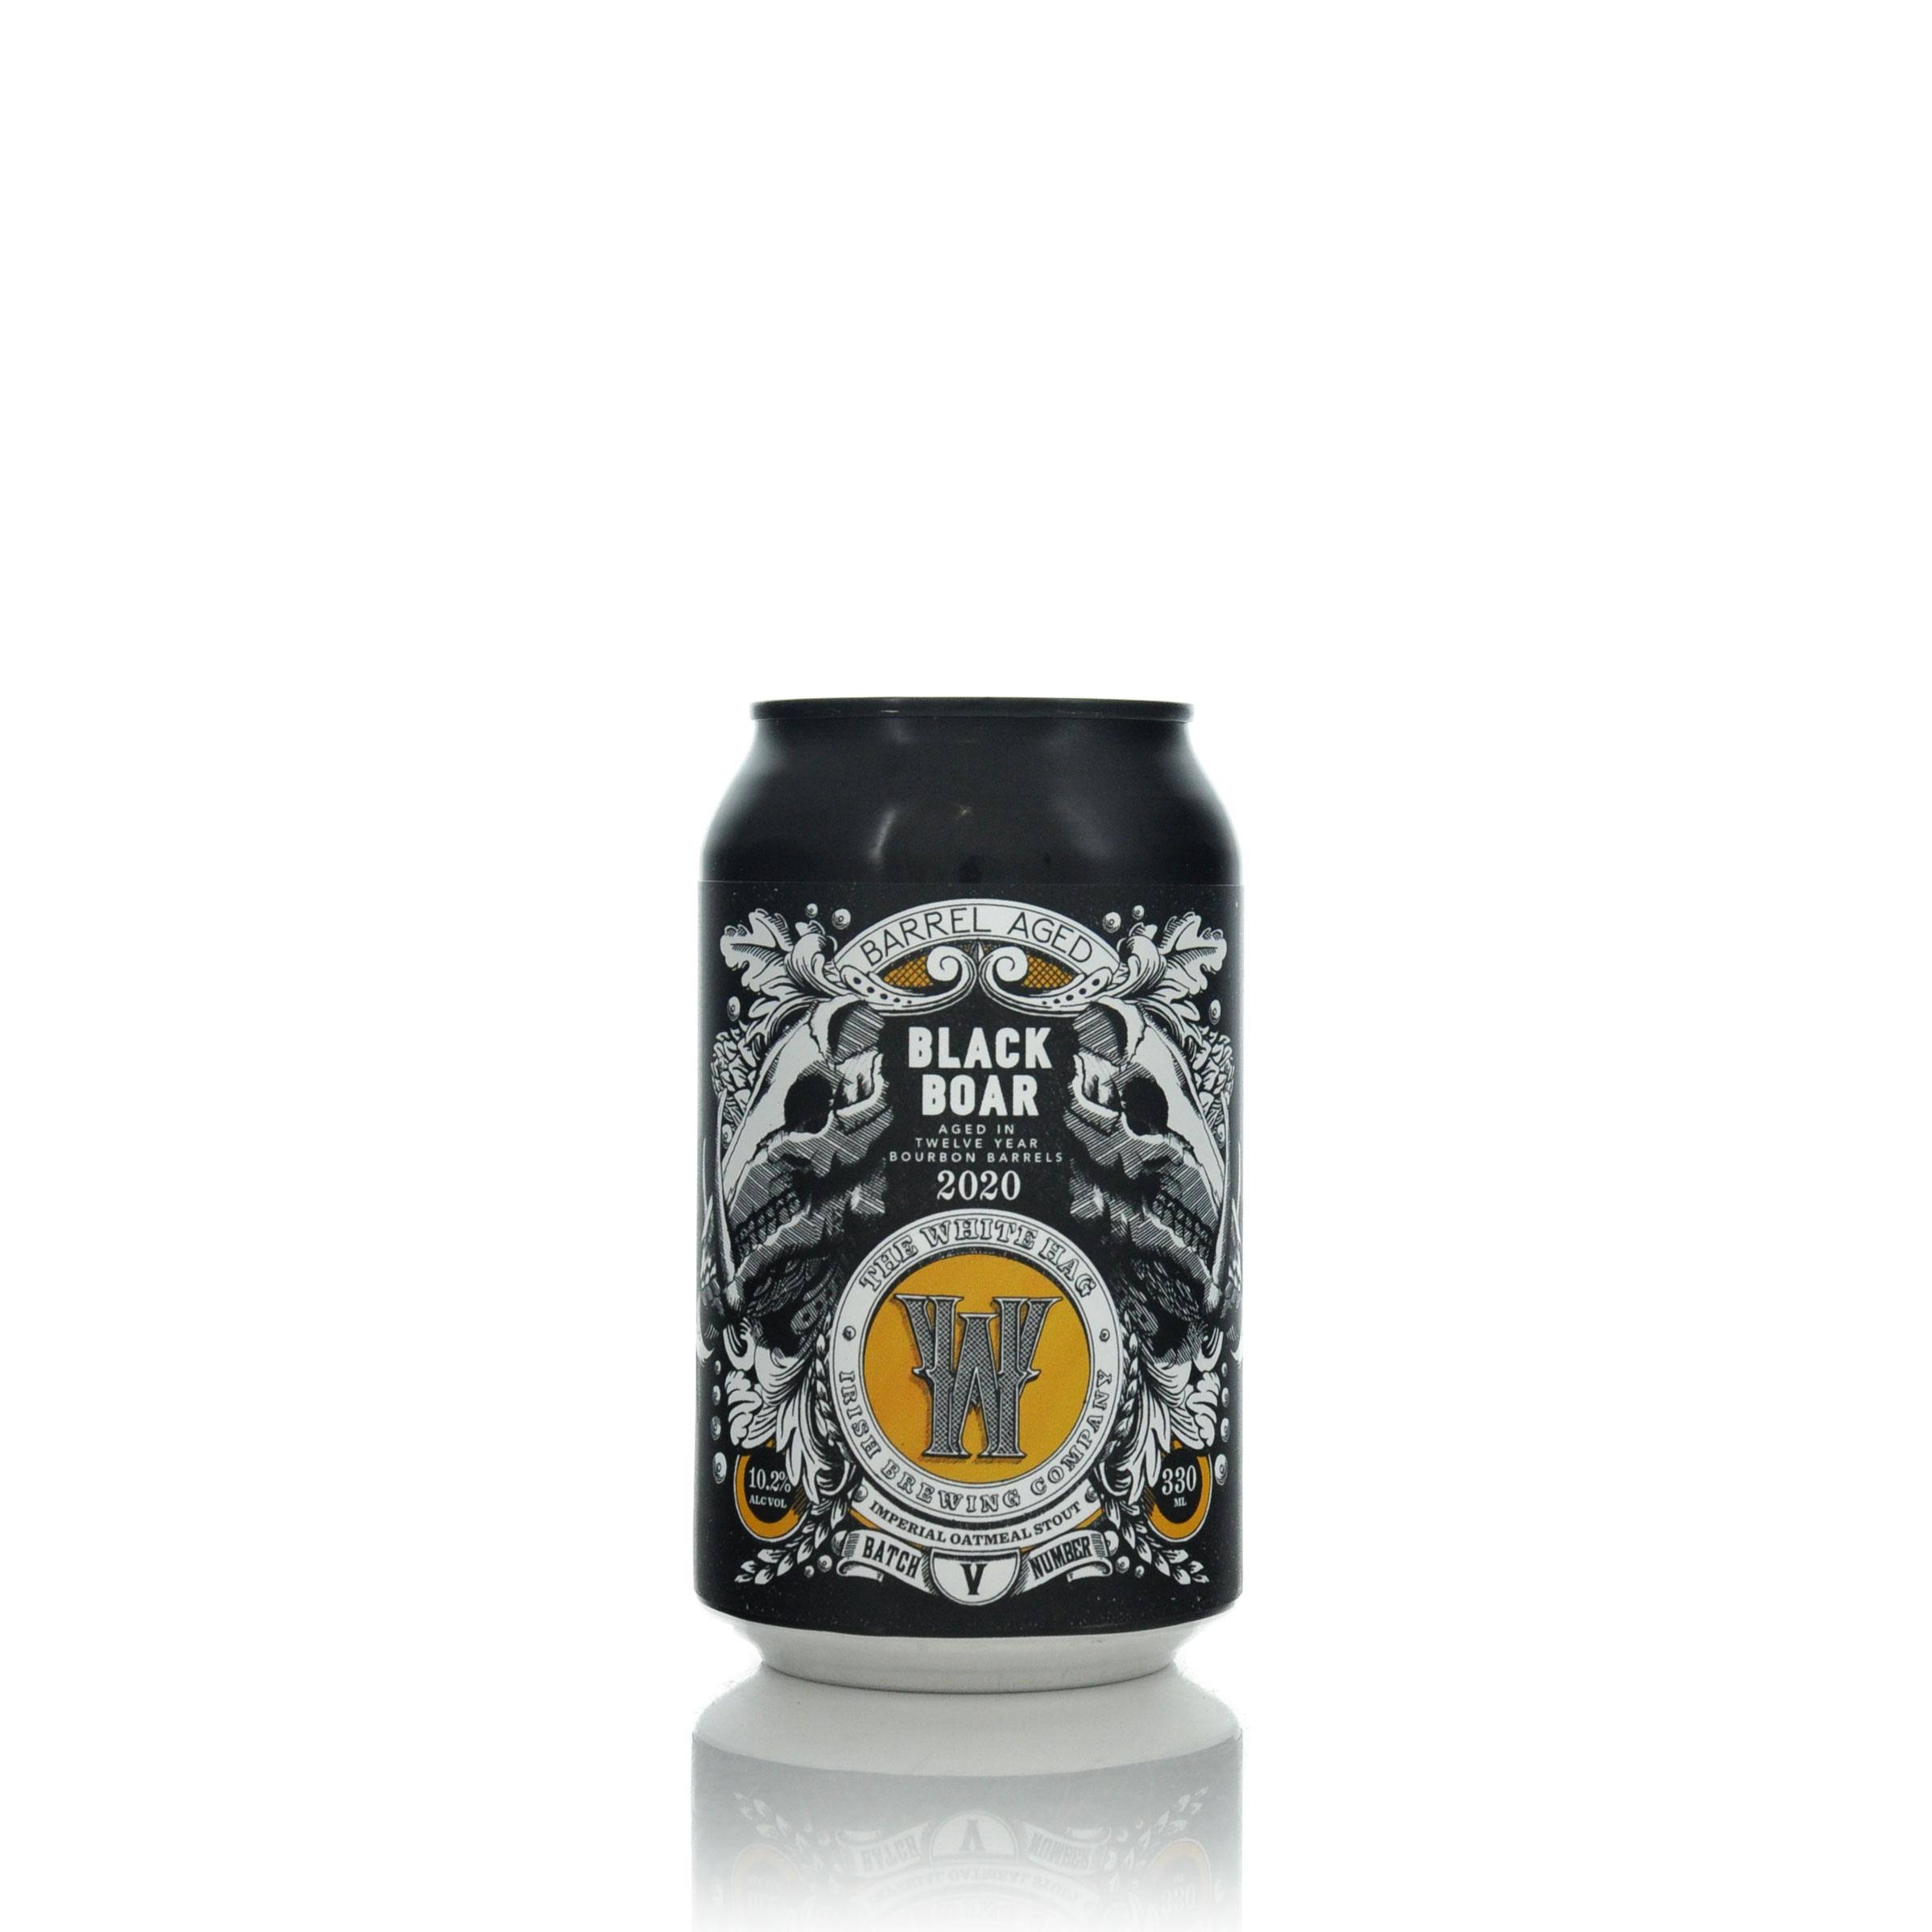 The White Hag Black Boar Barrel Aged Imperial Oatmeal Stout No.5 10.2% ABV